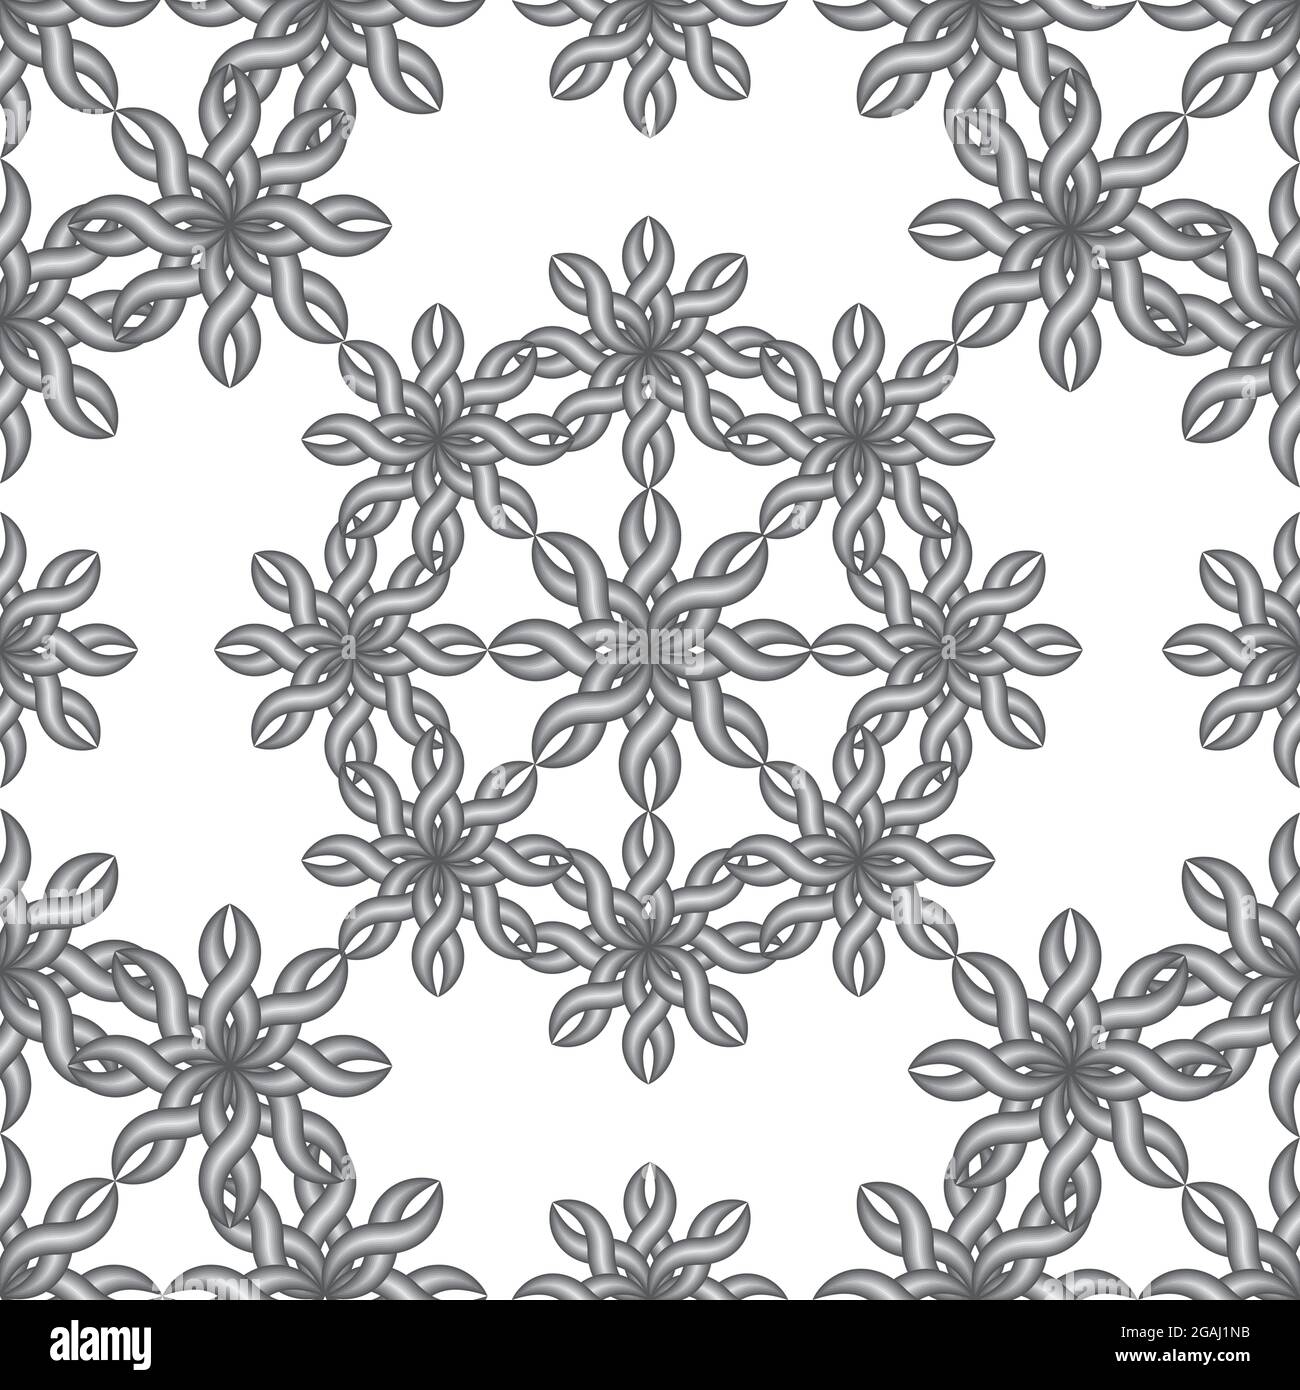 Metallic, abstract floral pattern in gray and white silver color with 3d effect. Vector illustration Stock Vector